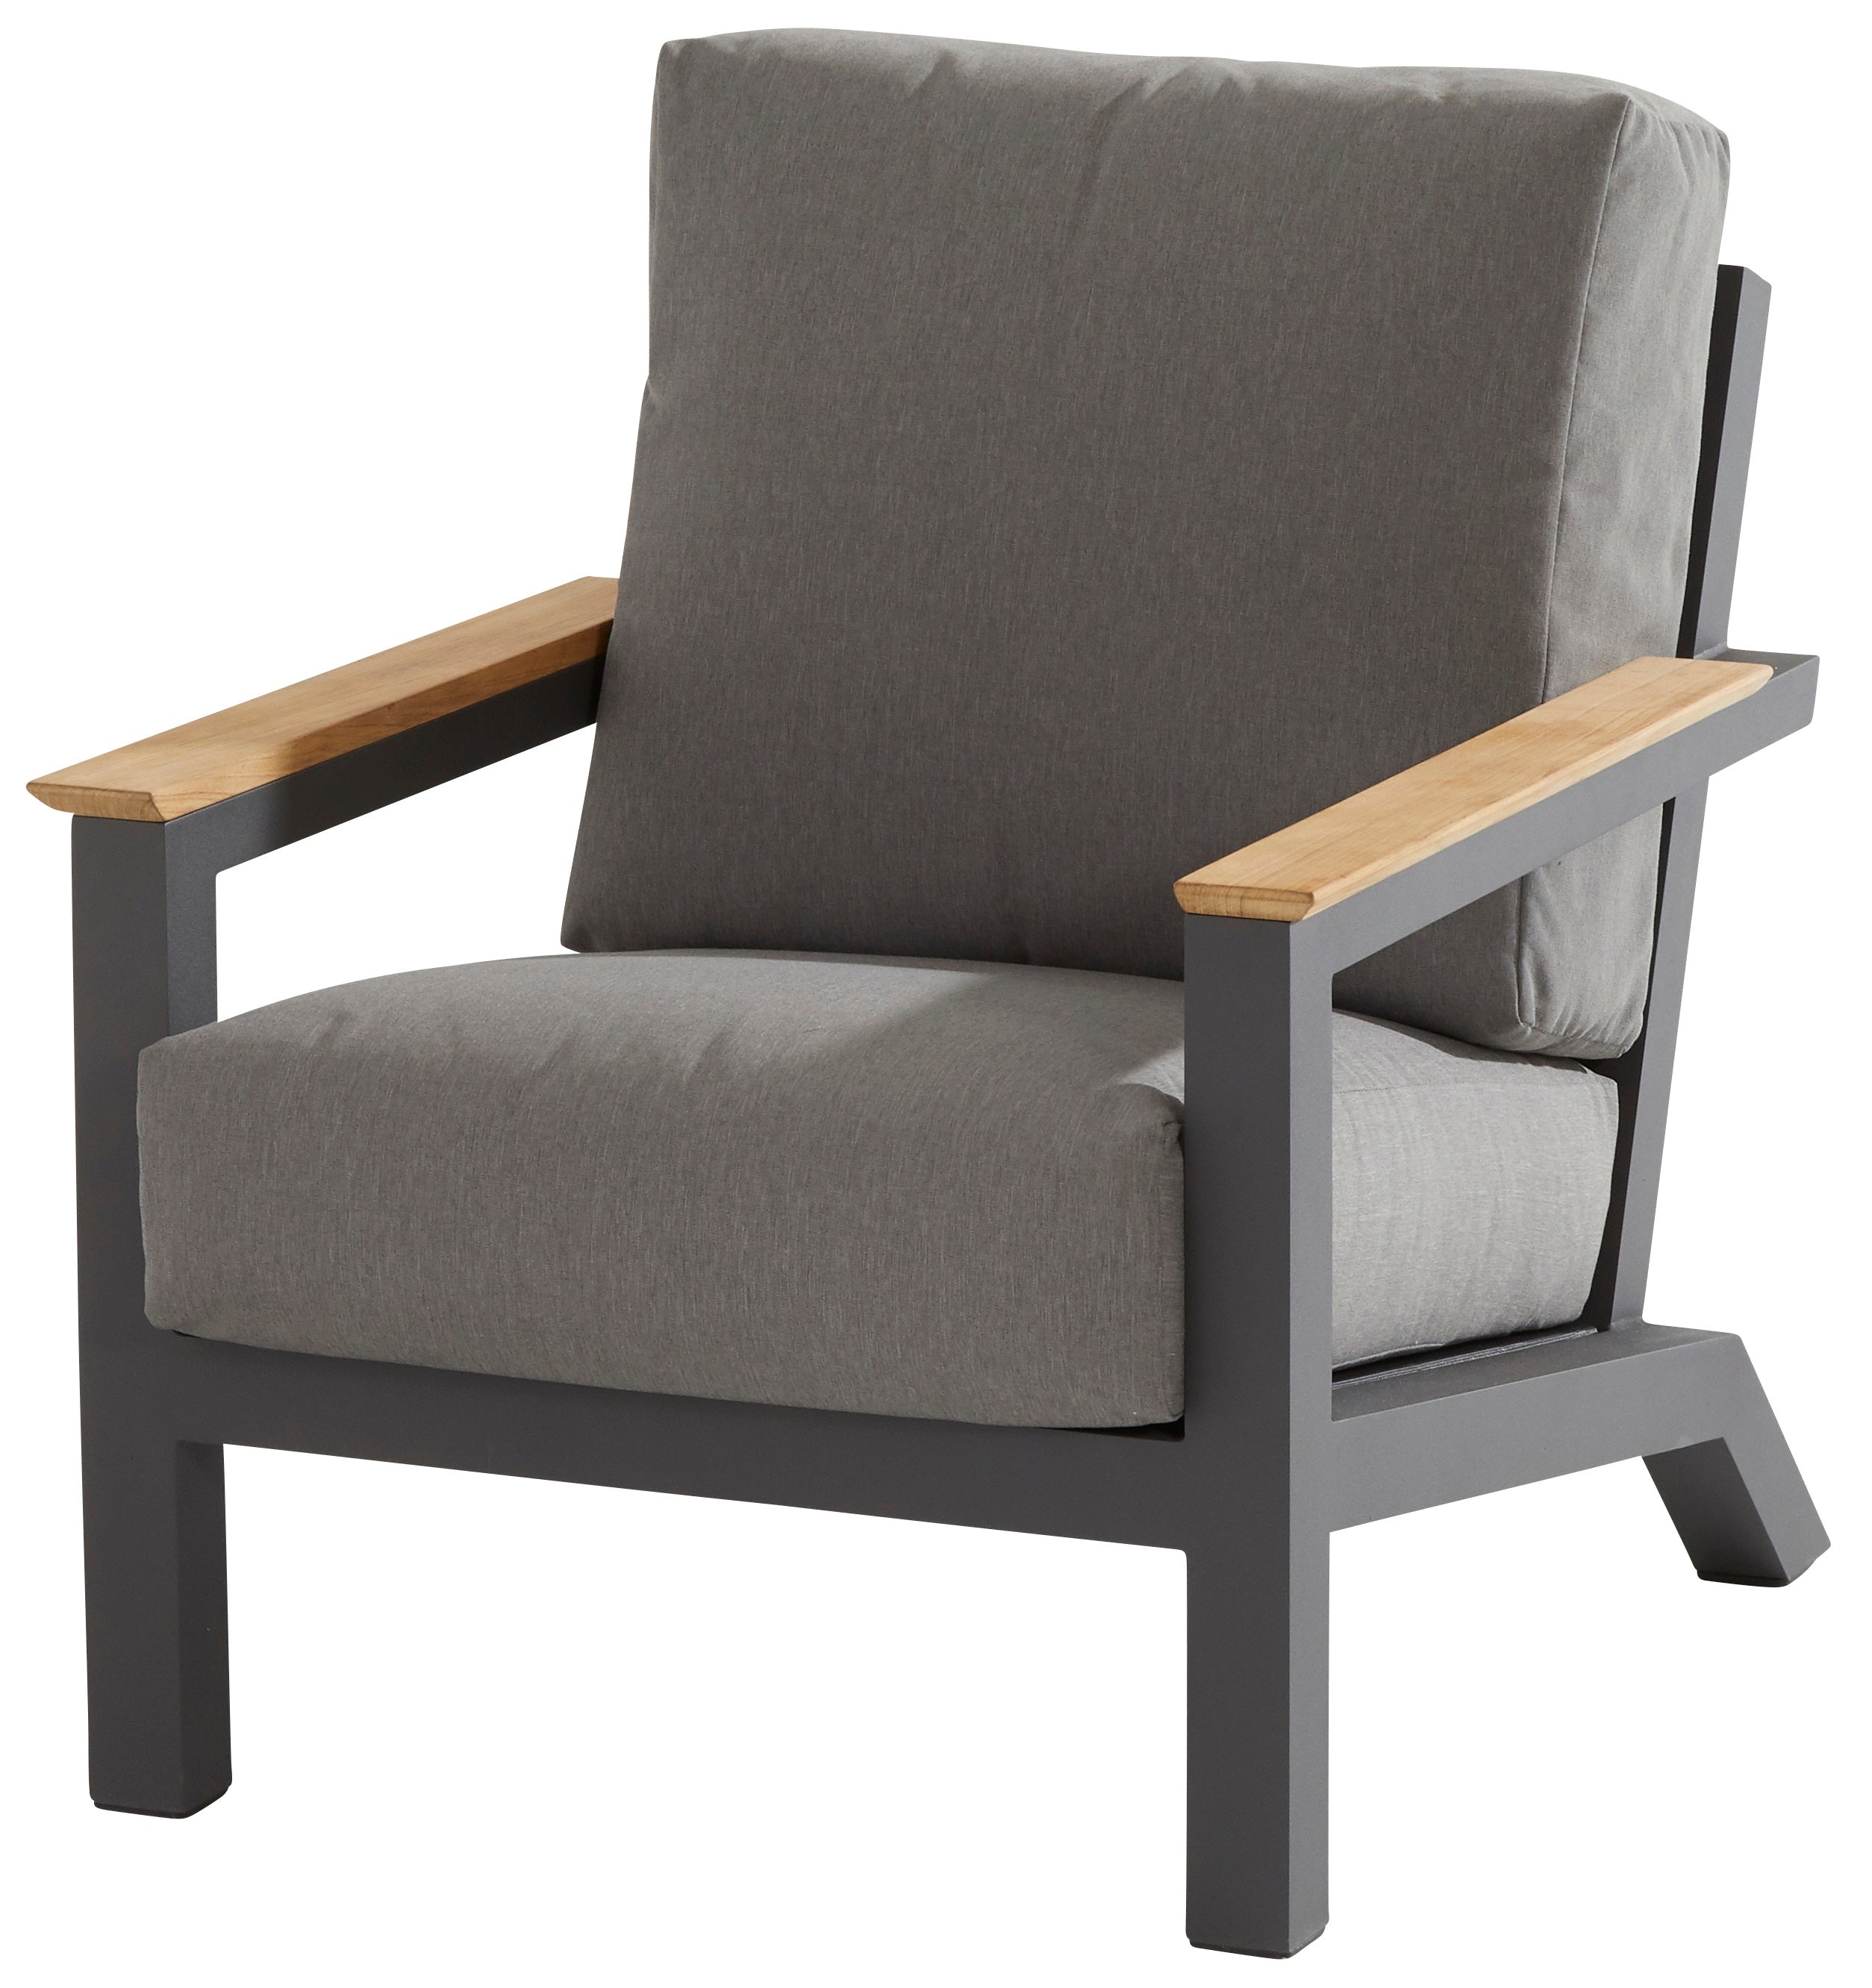 4 Seasons Outdoor Capitol Living Chair